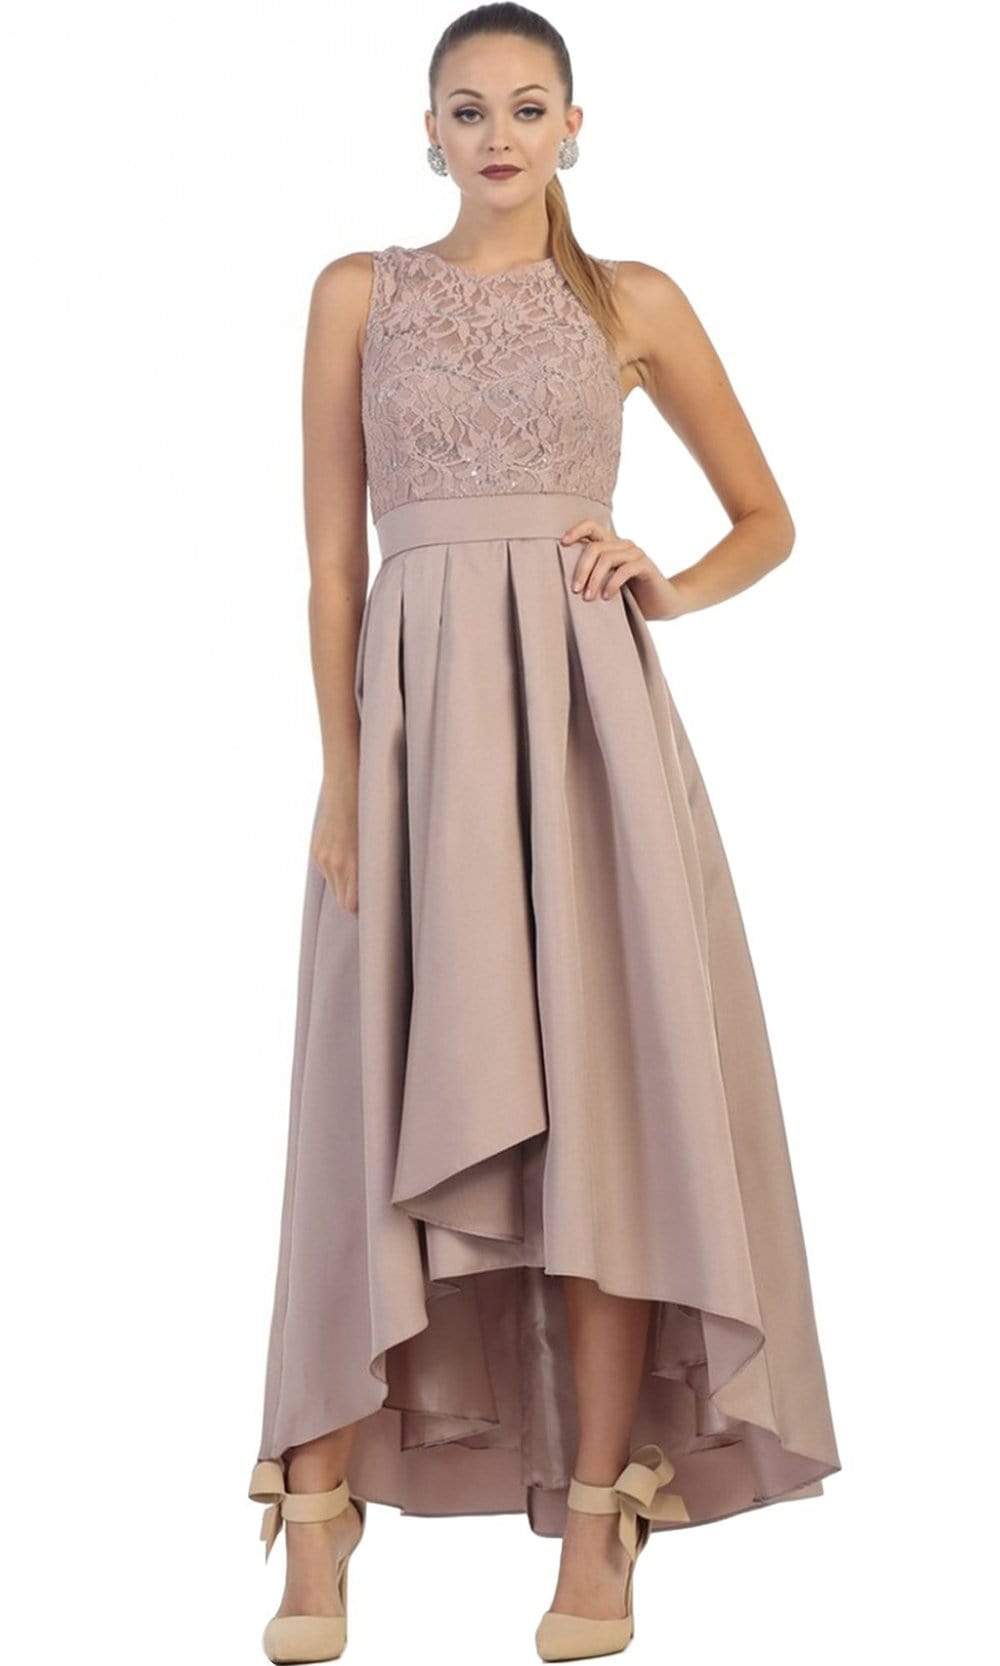 Image of May Queen - High Low Illusion Jewel A-line Evening Dress